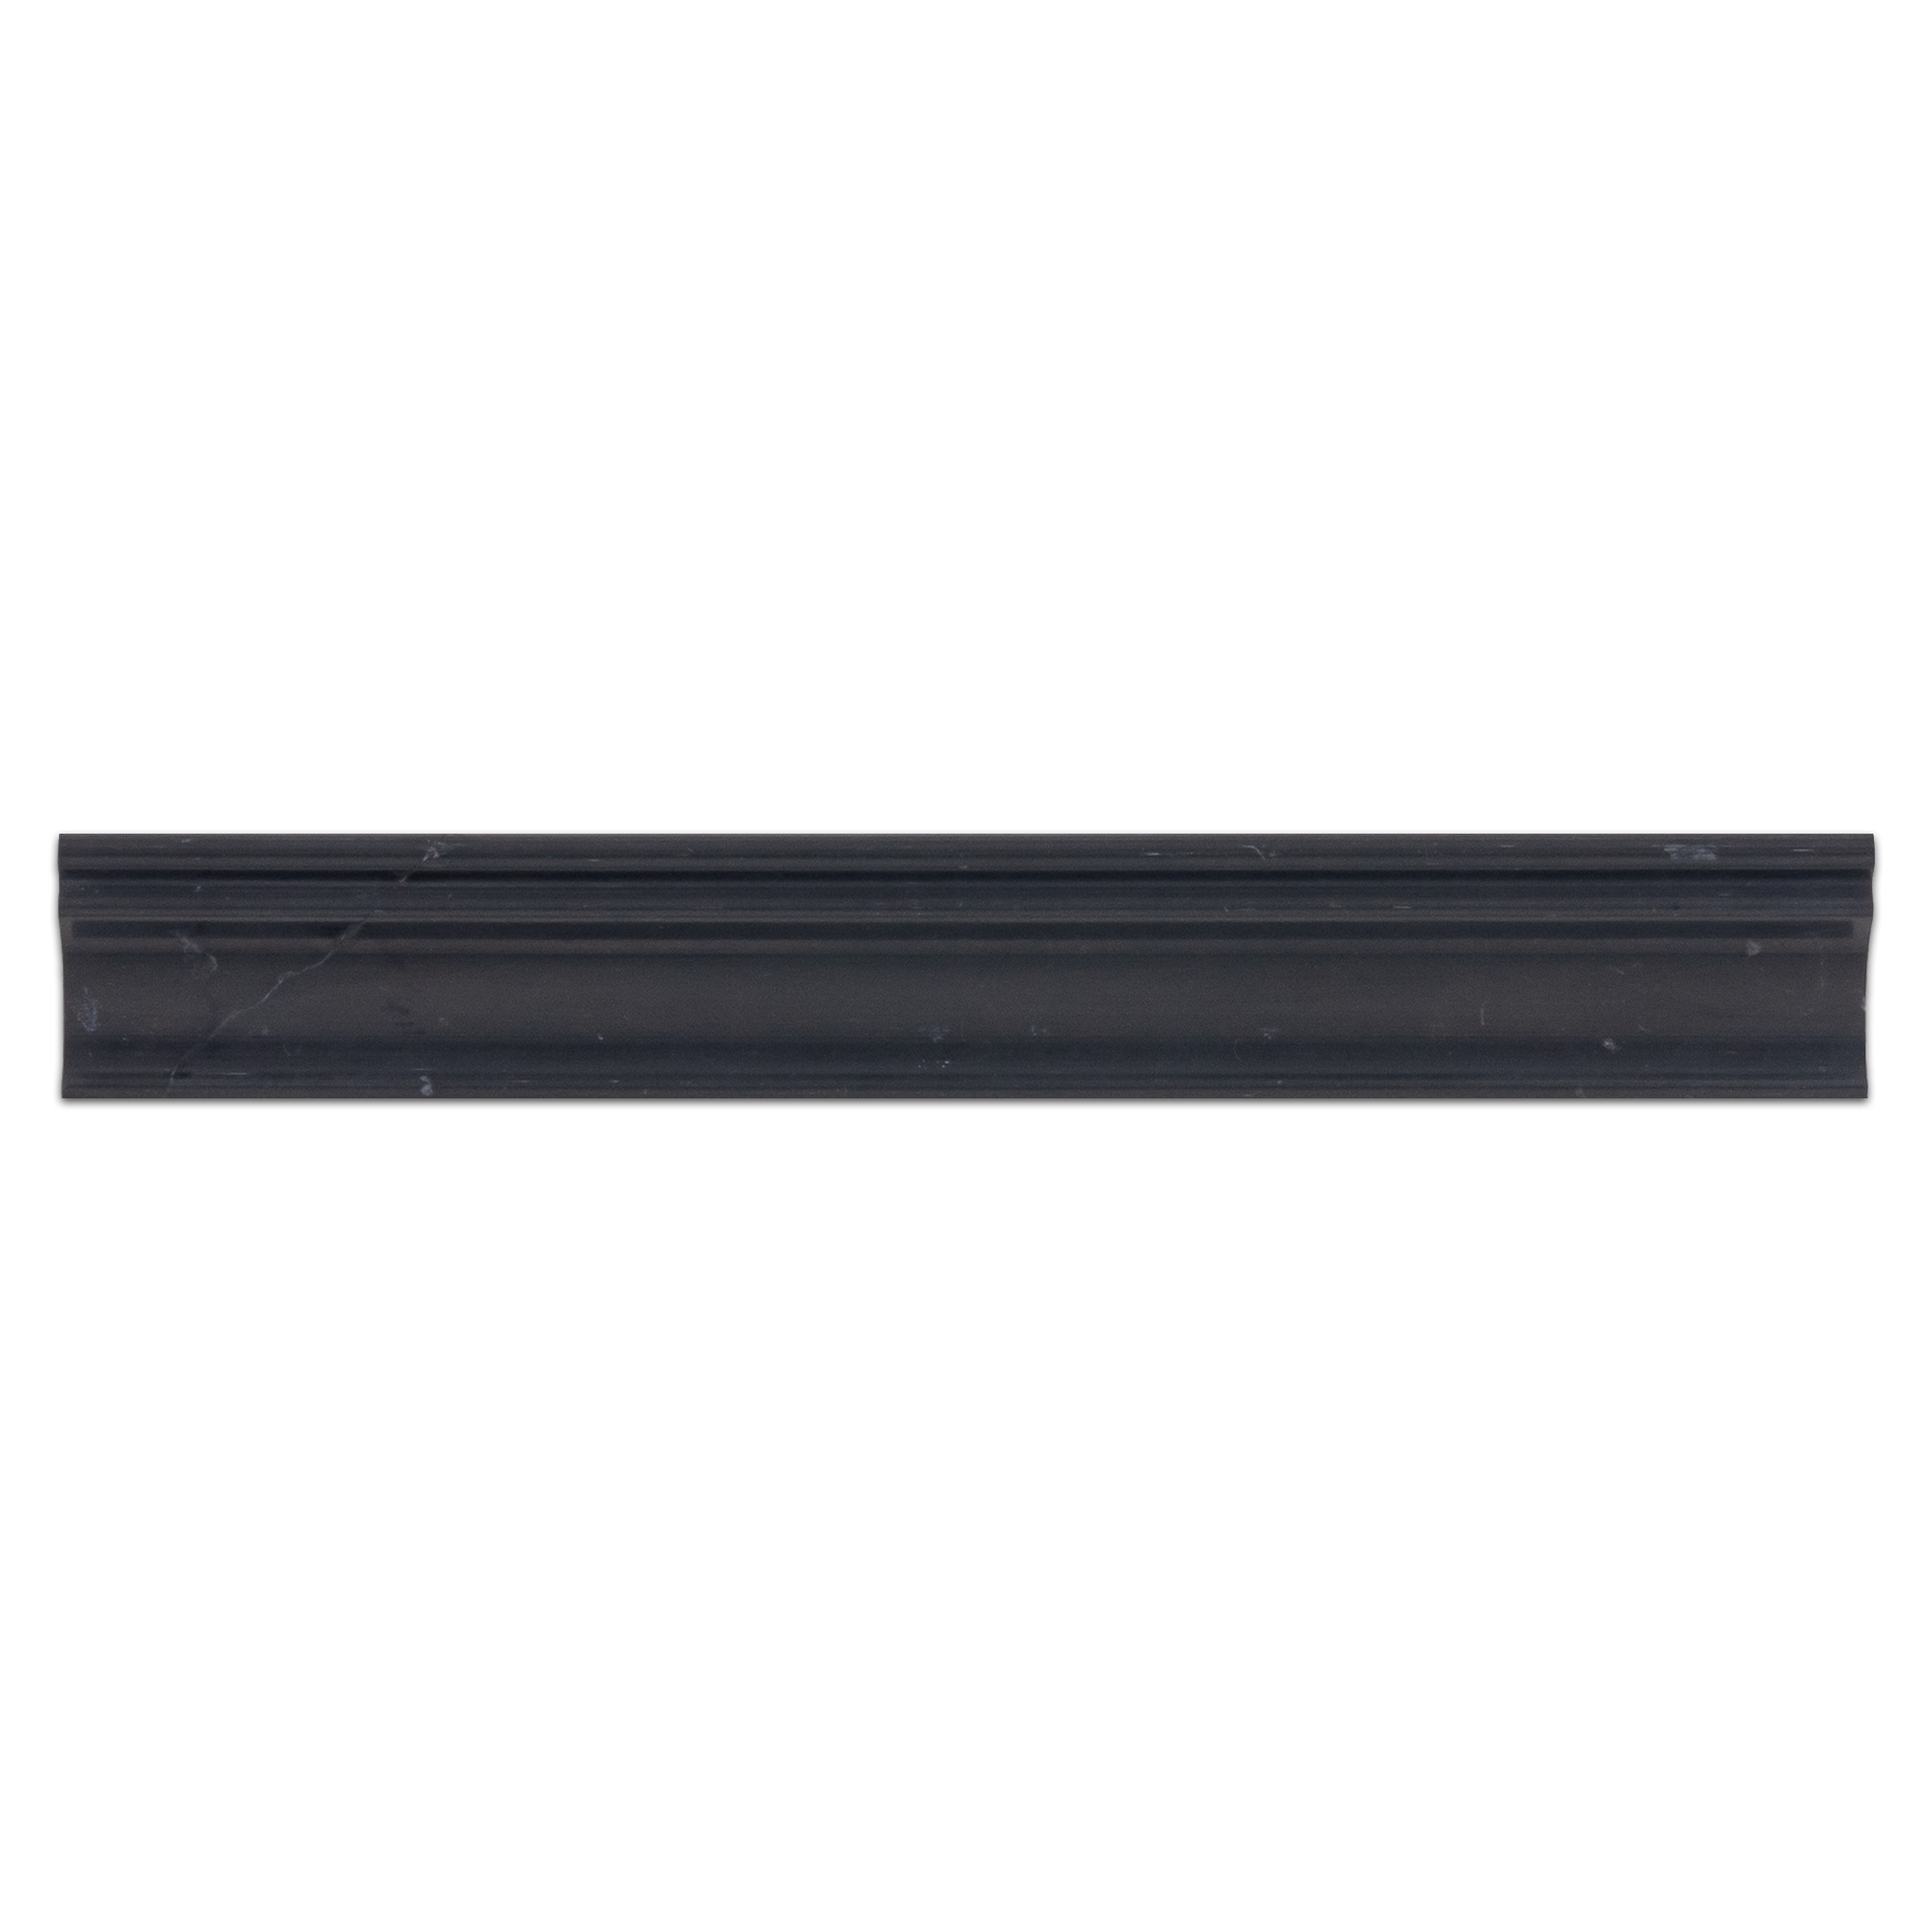 Elon Black Marble Crown 2x12 Honed Molding Tile from Surface Group International.